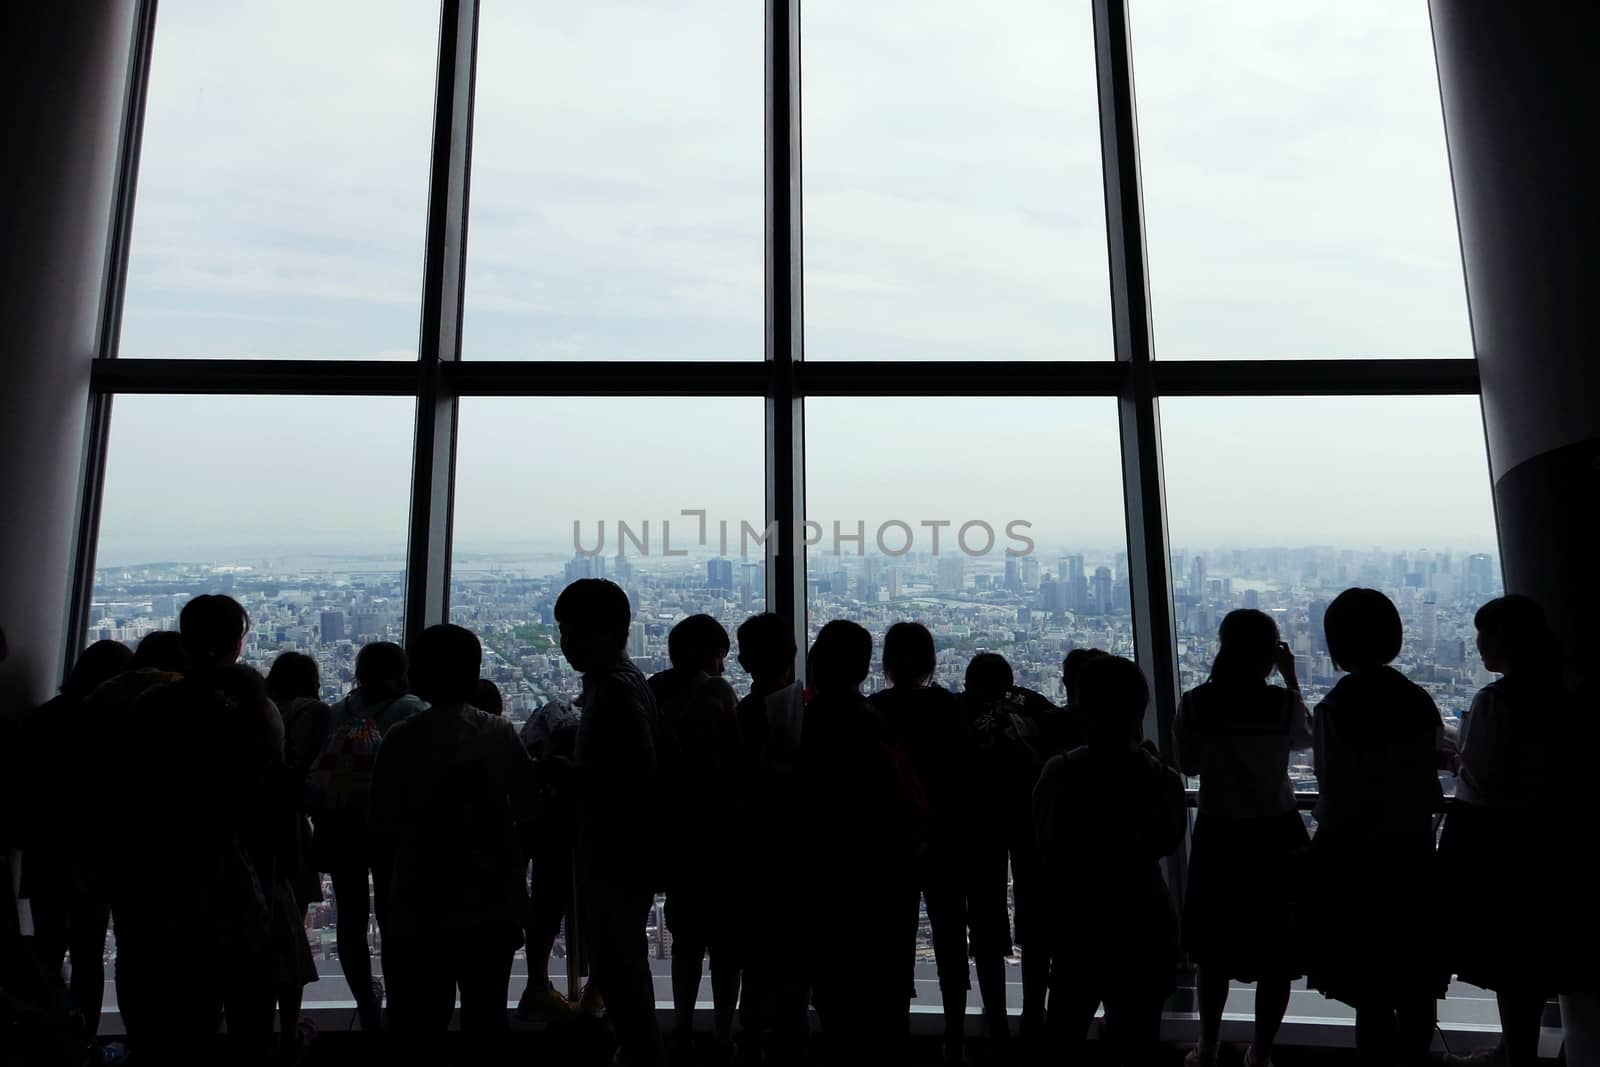 The silhouette of sightseeing people with Japan cityscape background